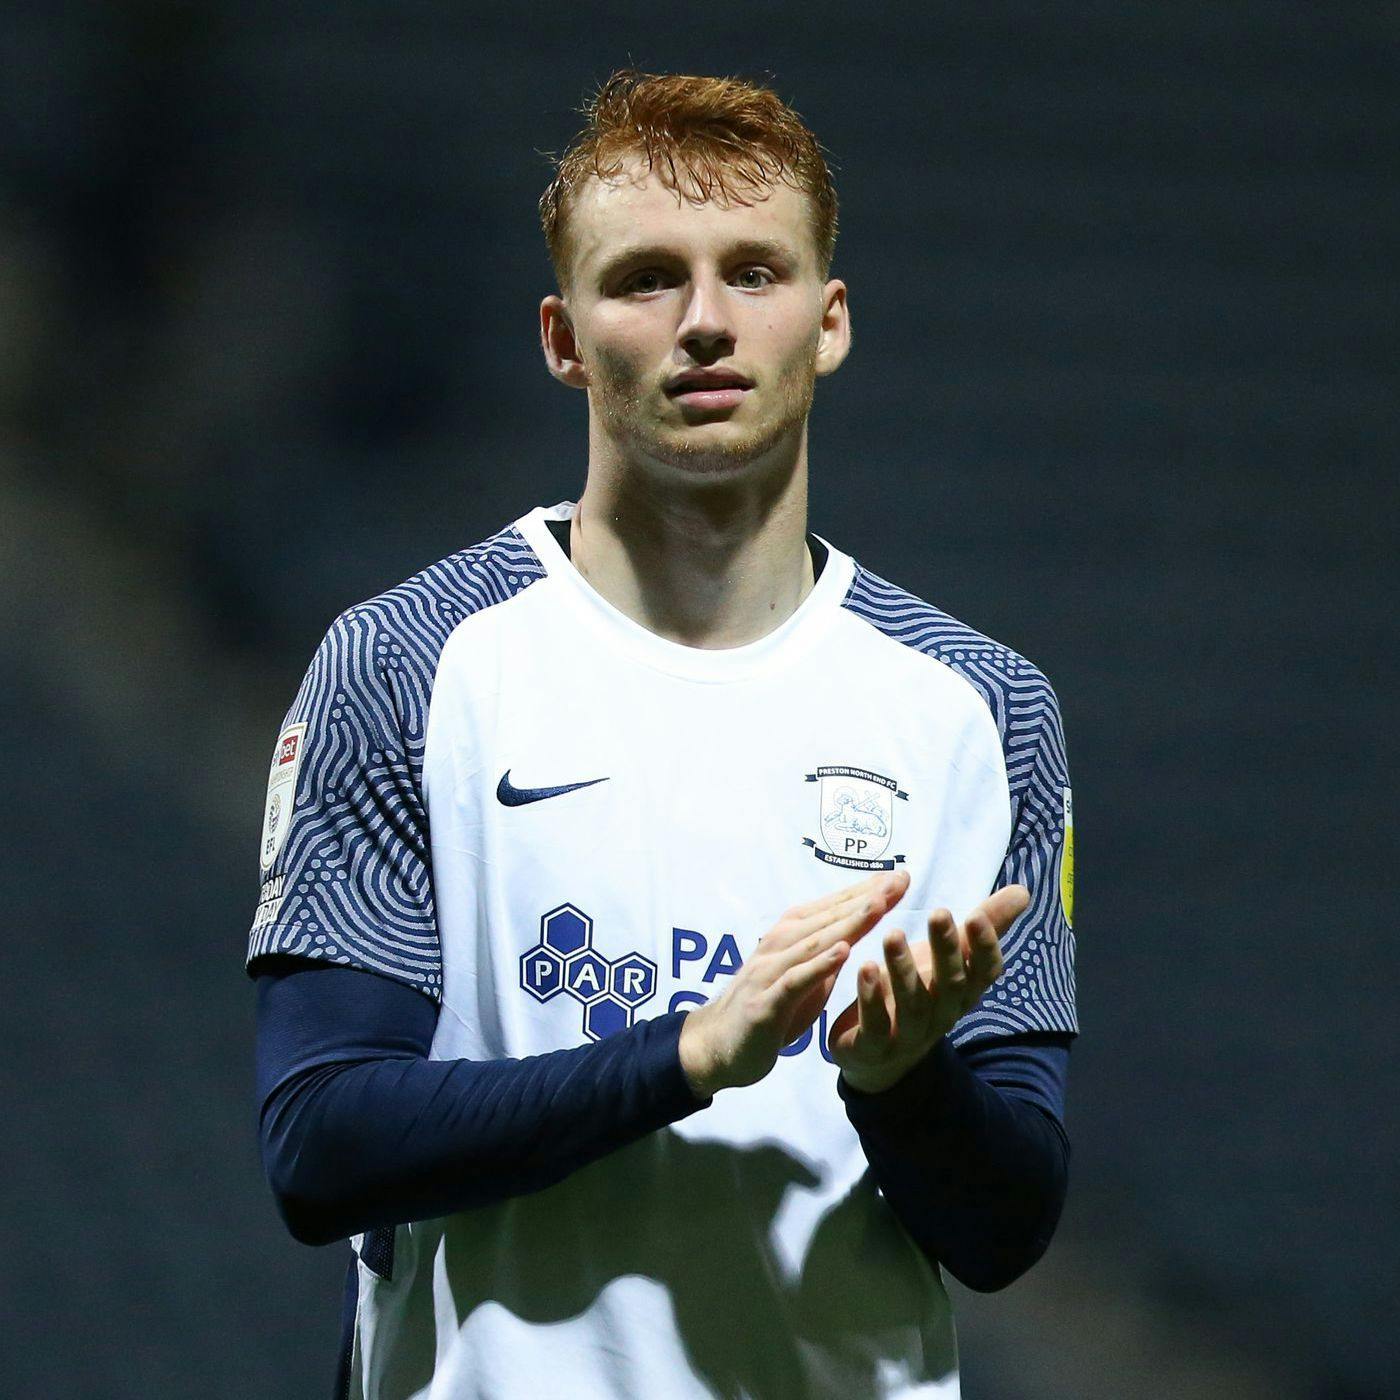 Behind Enemy Lines: Reds head to Deepdale with Sepp van den Berg keen to impress familiar faces in Carabao Cup